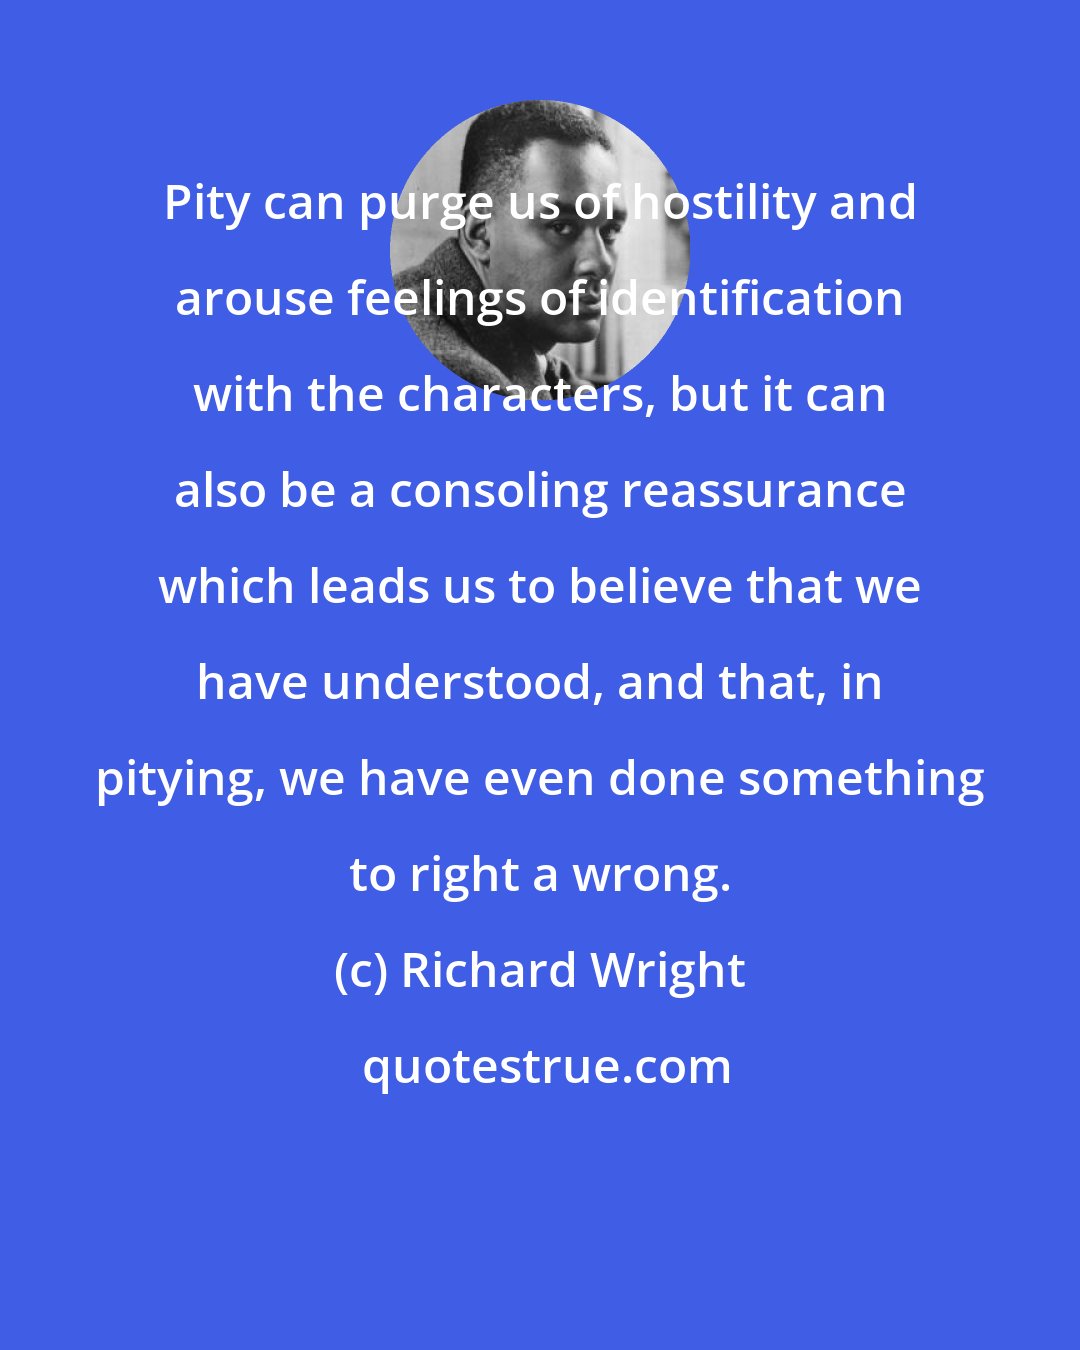 Richard Wright: Pity can purge us of hostility and arouse feelings of identification with the characters, but it can also be a consoling reassurance which leads us to believe that we have understood, and that, in pitying, we have even done something to right a wrong.